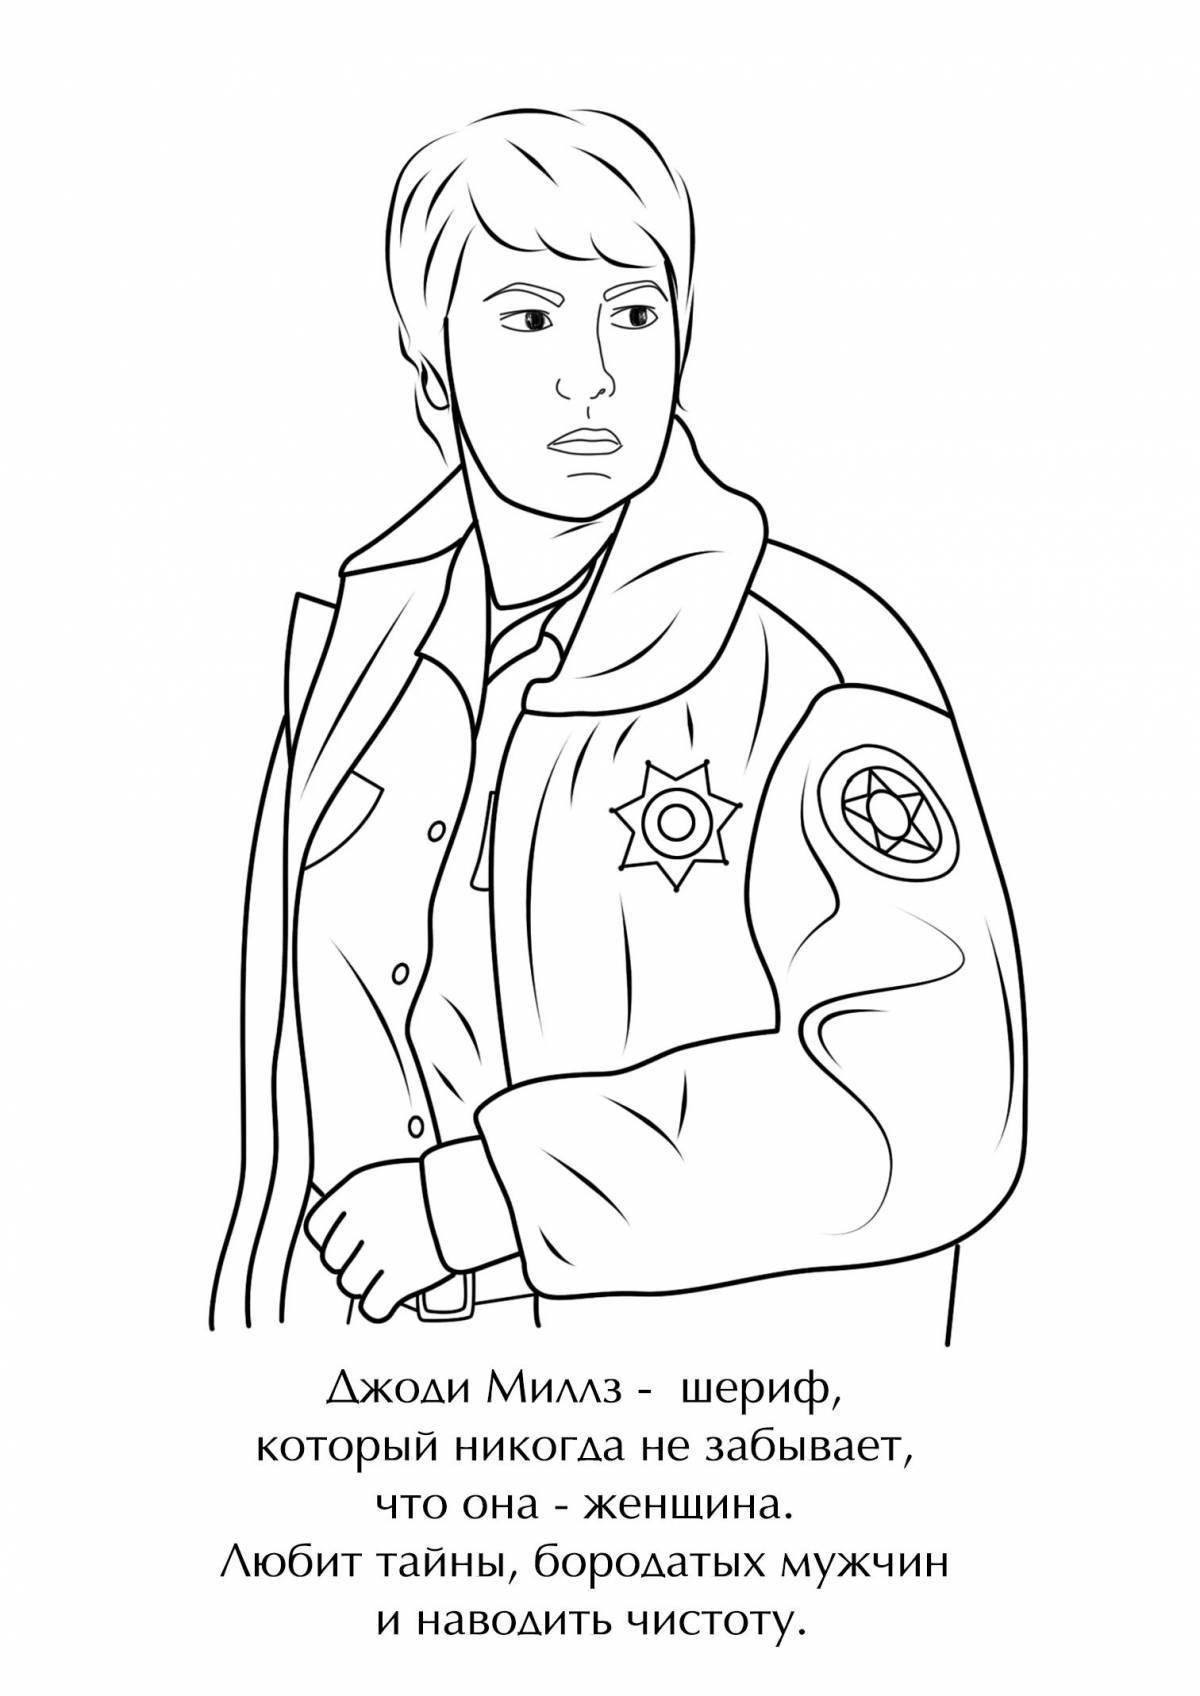 Sheriff's intriguing coloring book